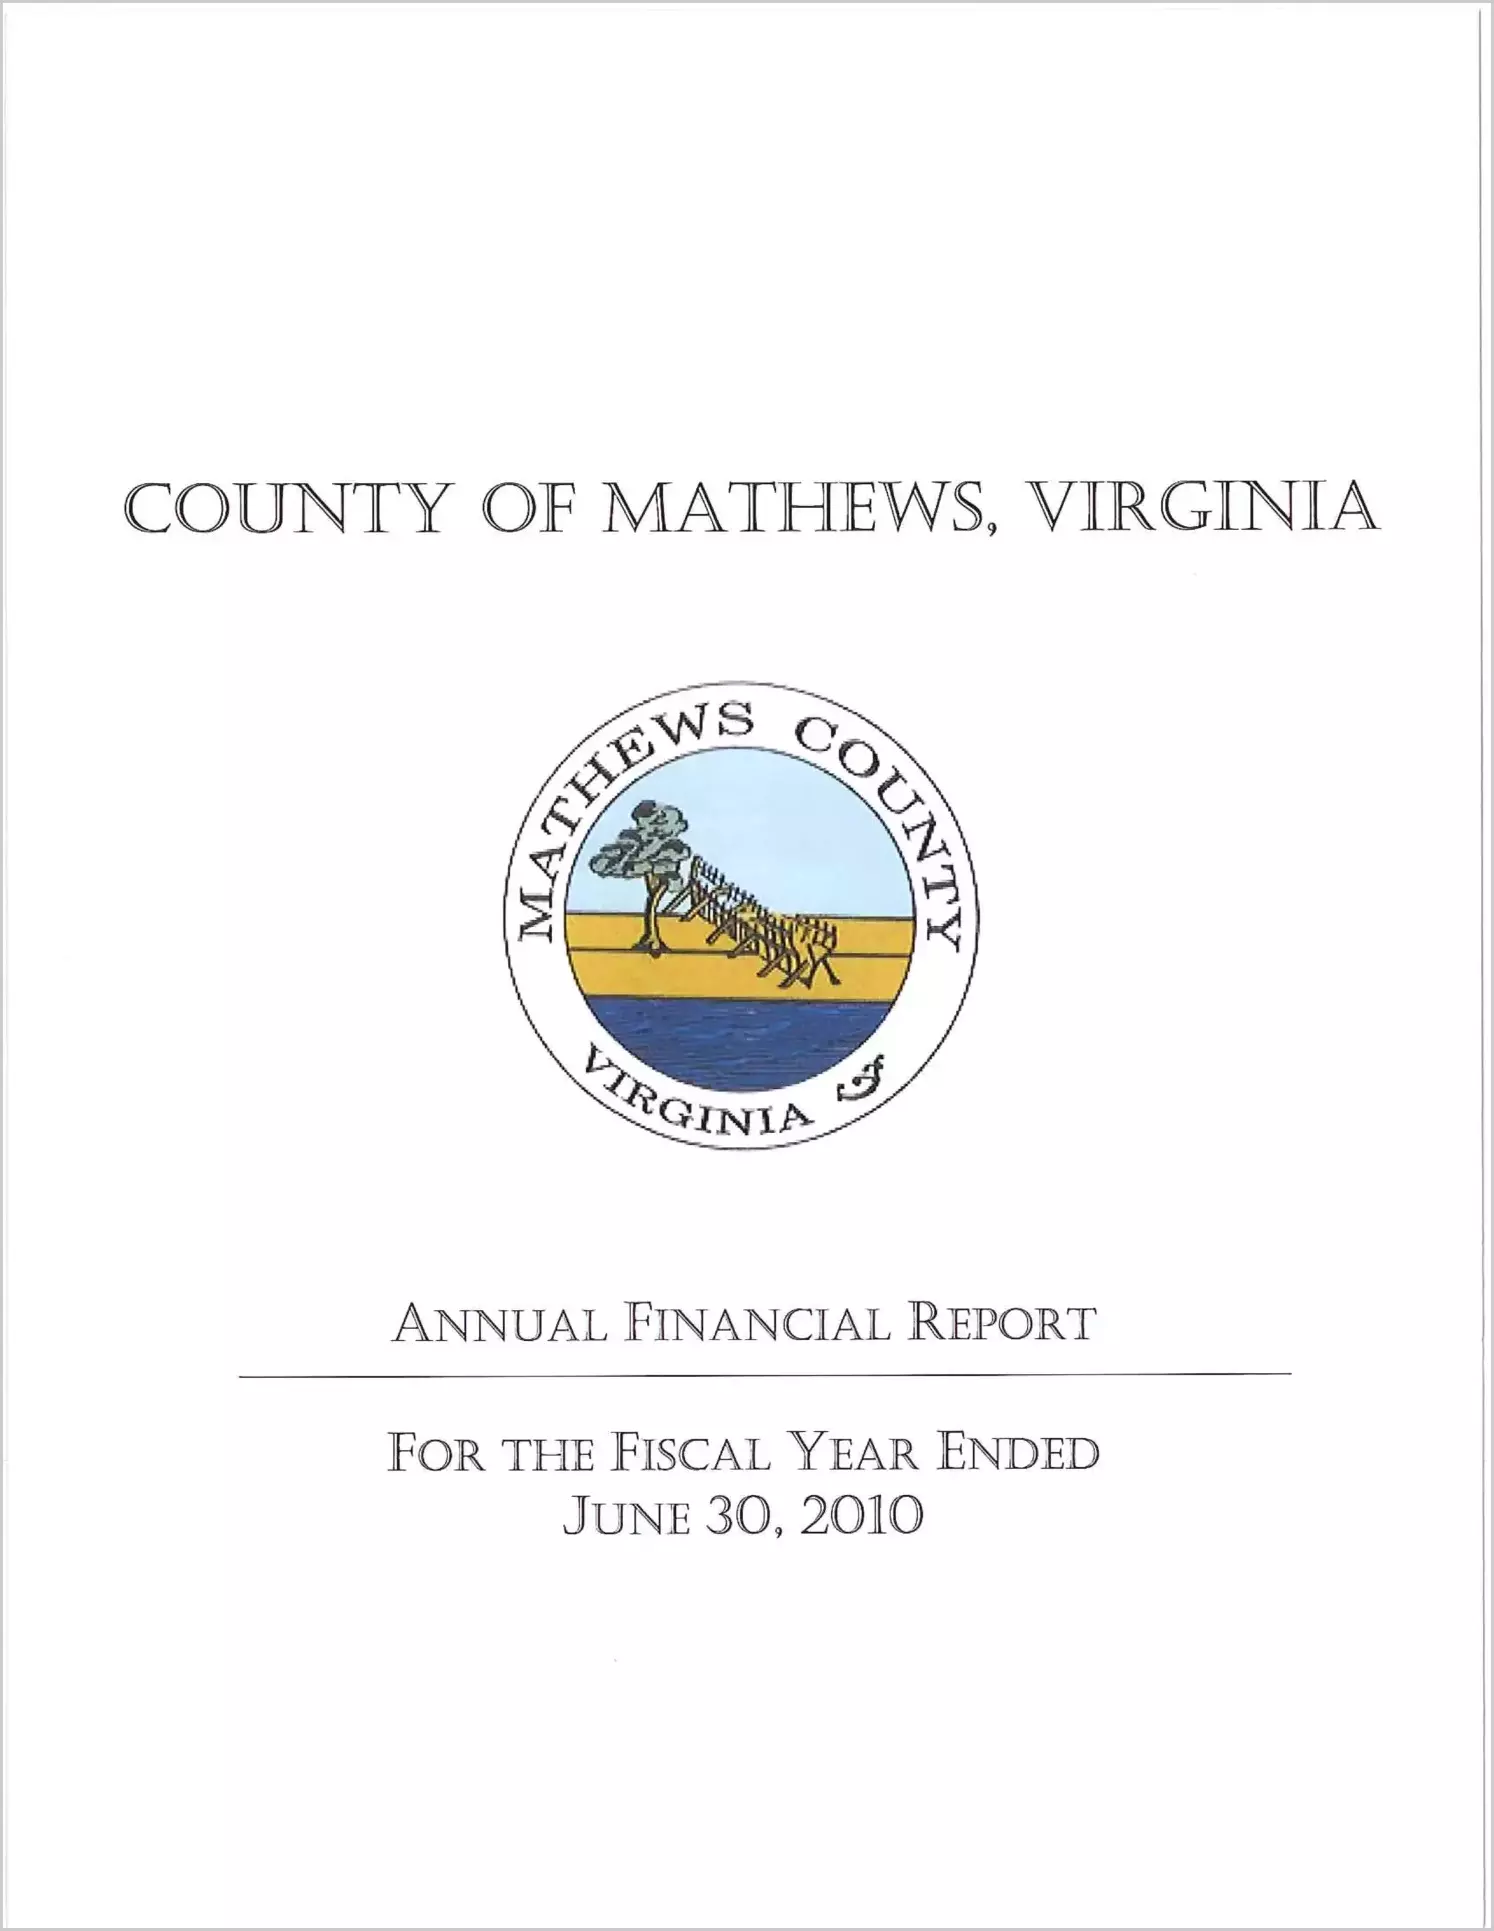 2010 Annual Financial Report for County of Mathews